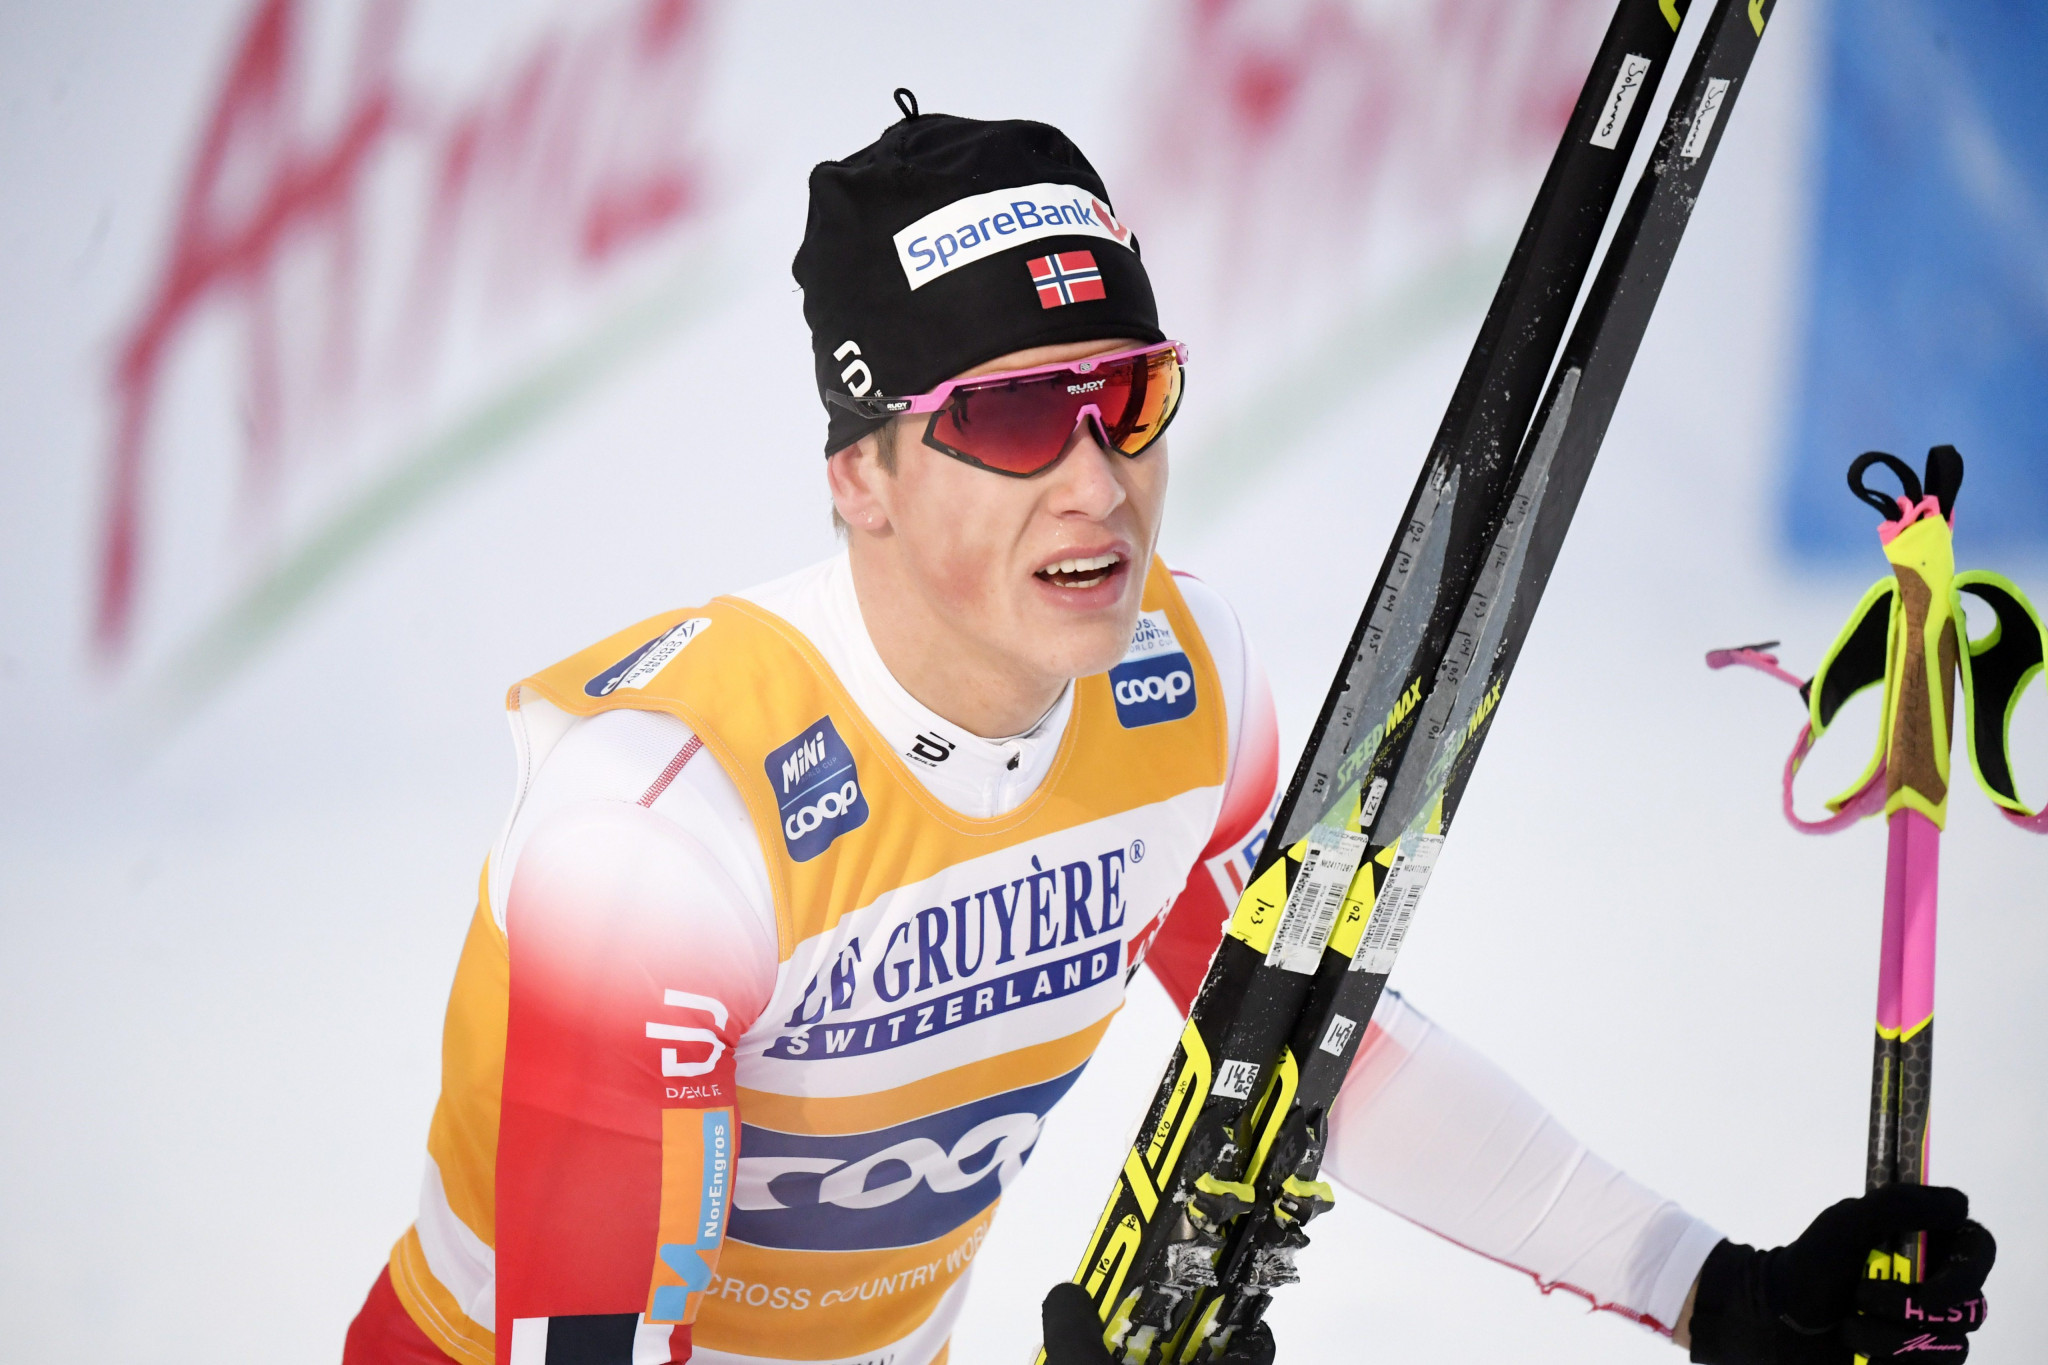 Norway's Johannes Høsflot Klæbo will aim to recover from a disappointing result in Lillehammer ©Getty Images